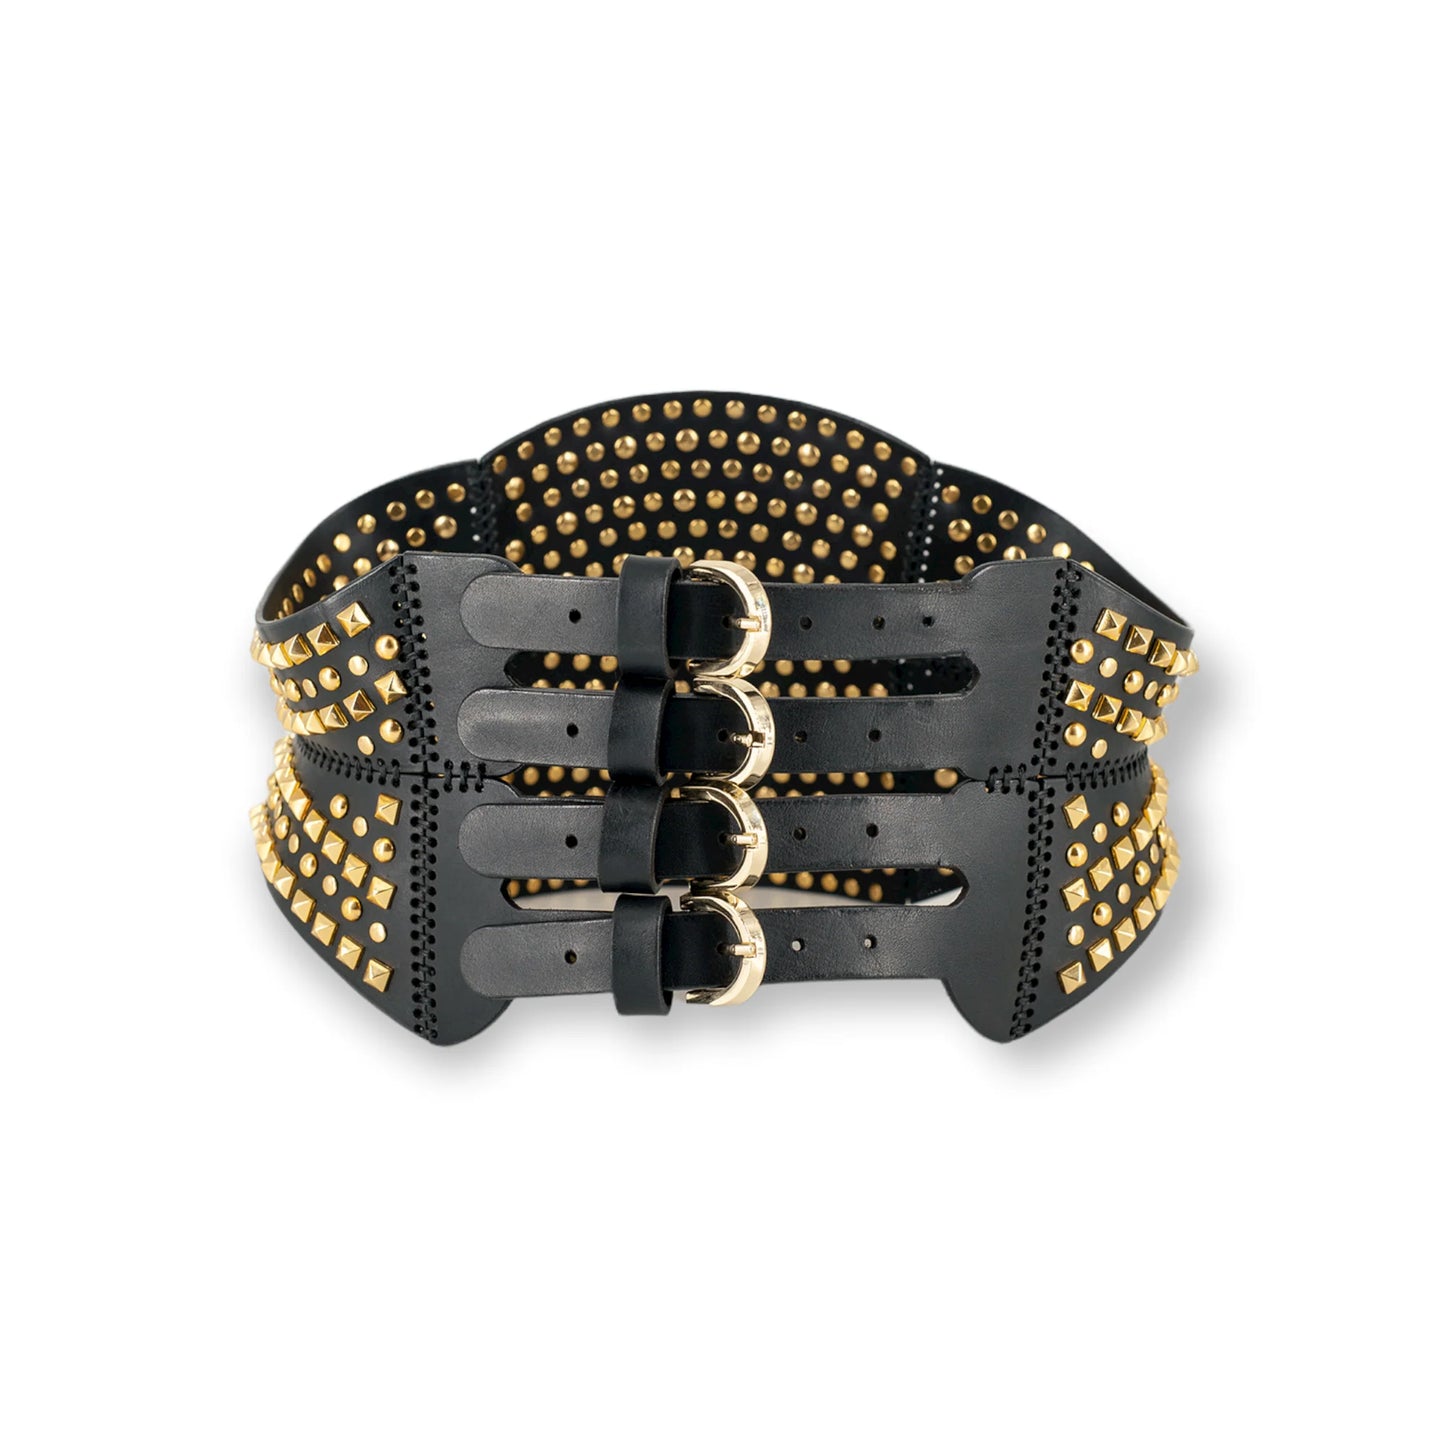 Leather corset belt with rivets